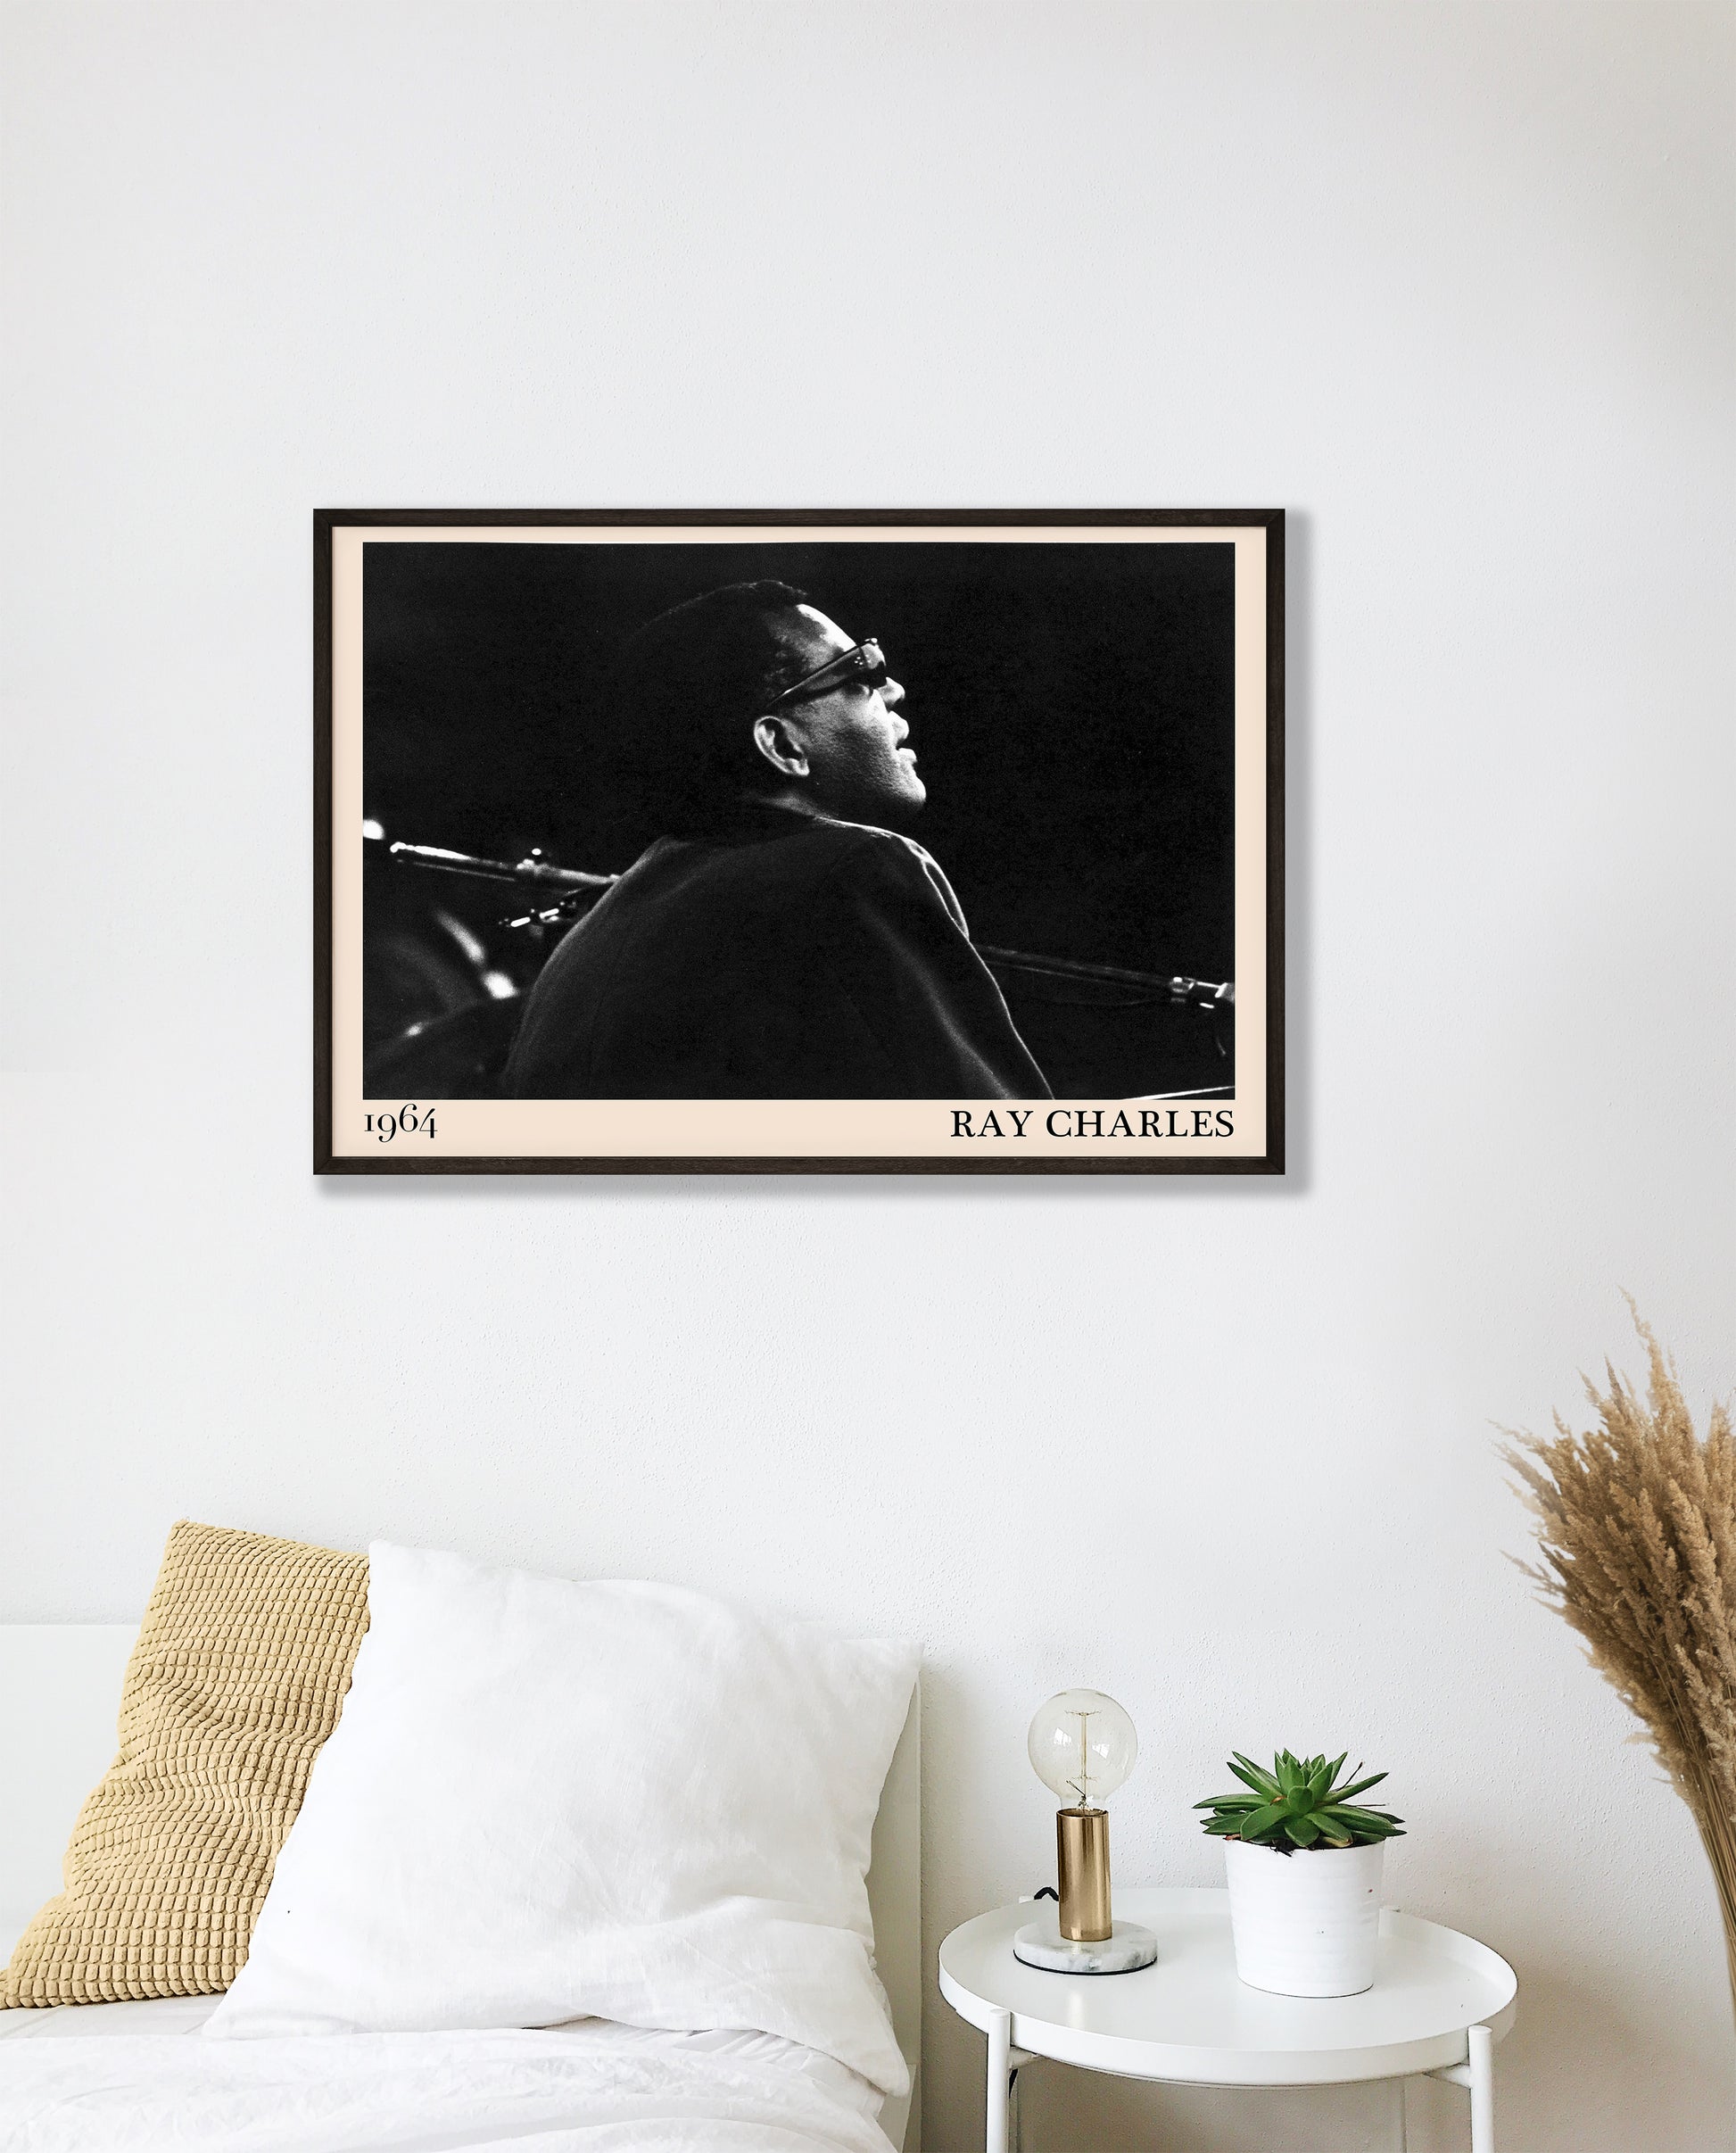  1964 photograph of blues legend Ray Charles, transformed into a cool black-framed poster hanging on a white bedroom room wall